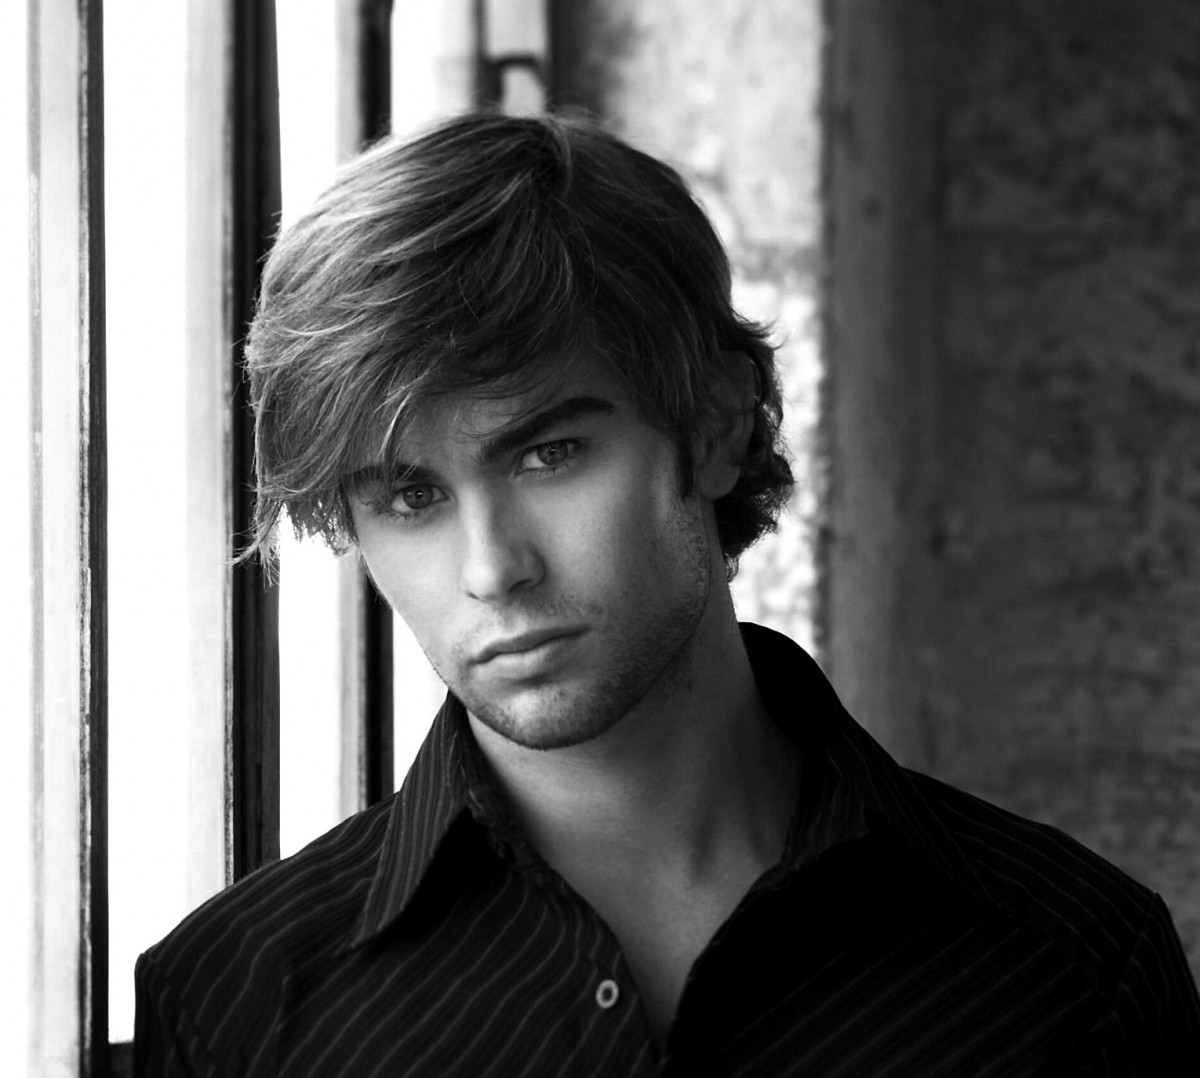 Chace Crawford photo 8 of 184 pics, wallpaper - photo #176925 - ThePlace2